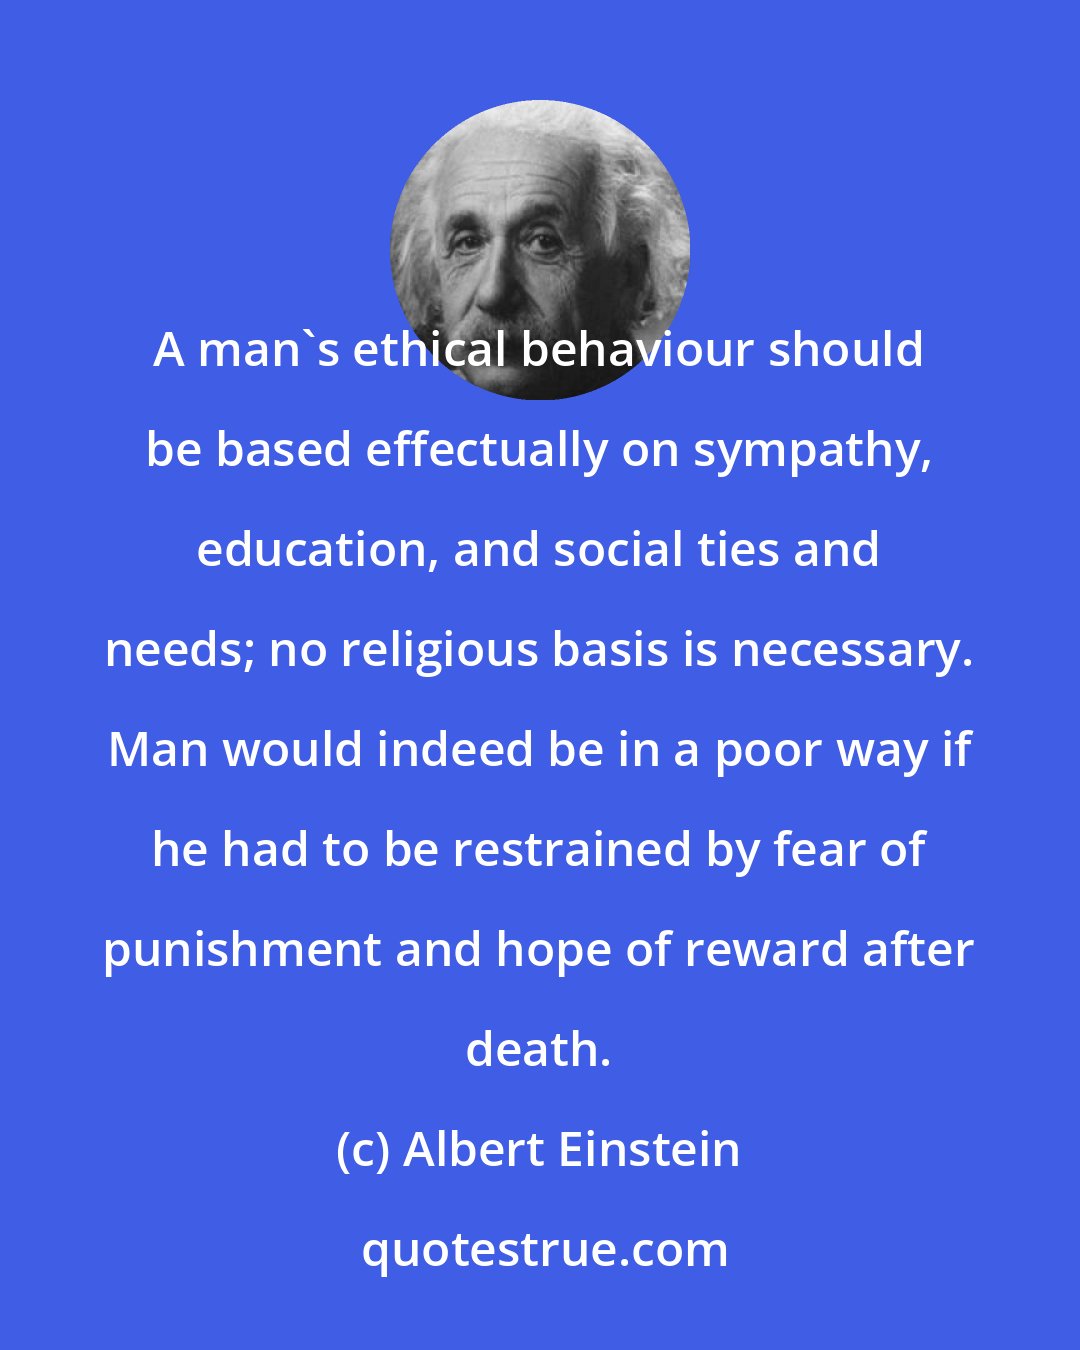 Albert Einstein: A man's ethical behaviour should be based effectually on sympathy, education, and social ties and needs; no religious basis is necessary. Man would indeed be in a poor way if he had to be restrained by fear of punishment and hope of reward after death.